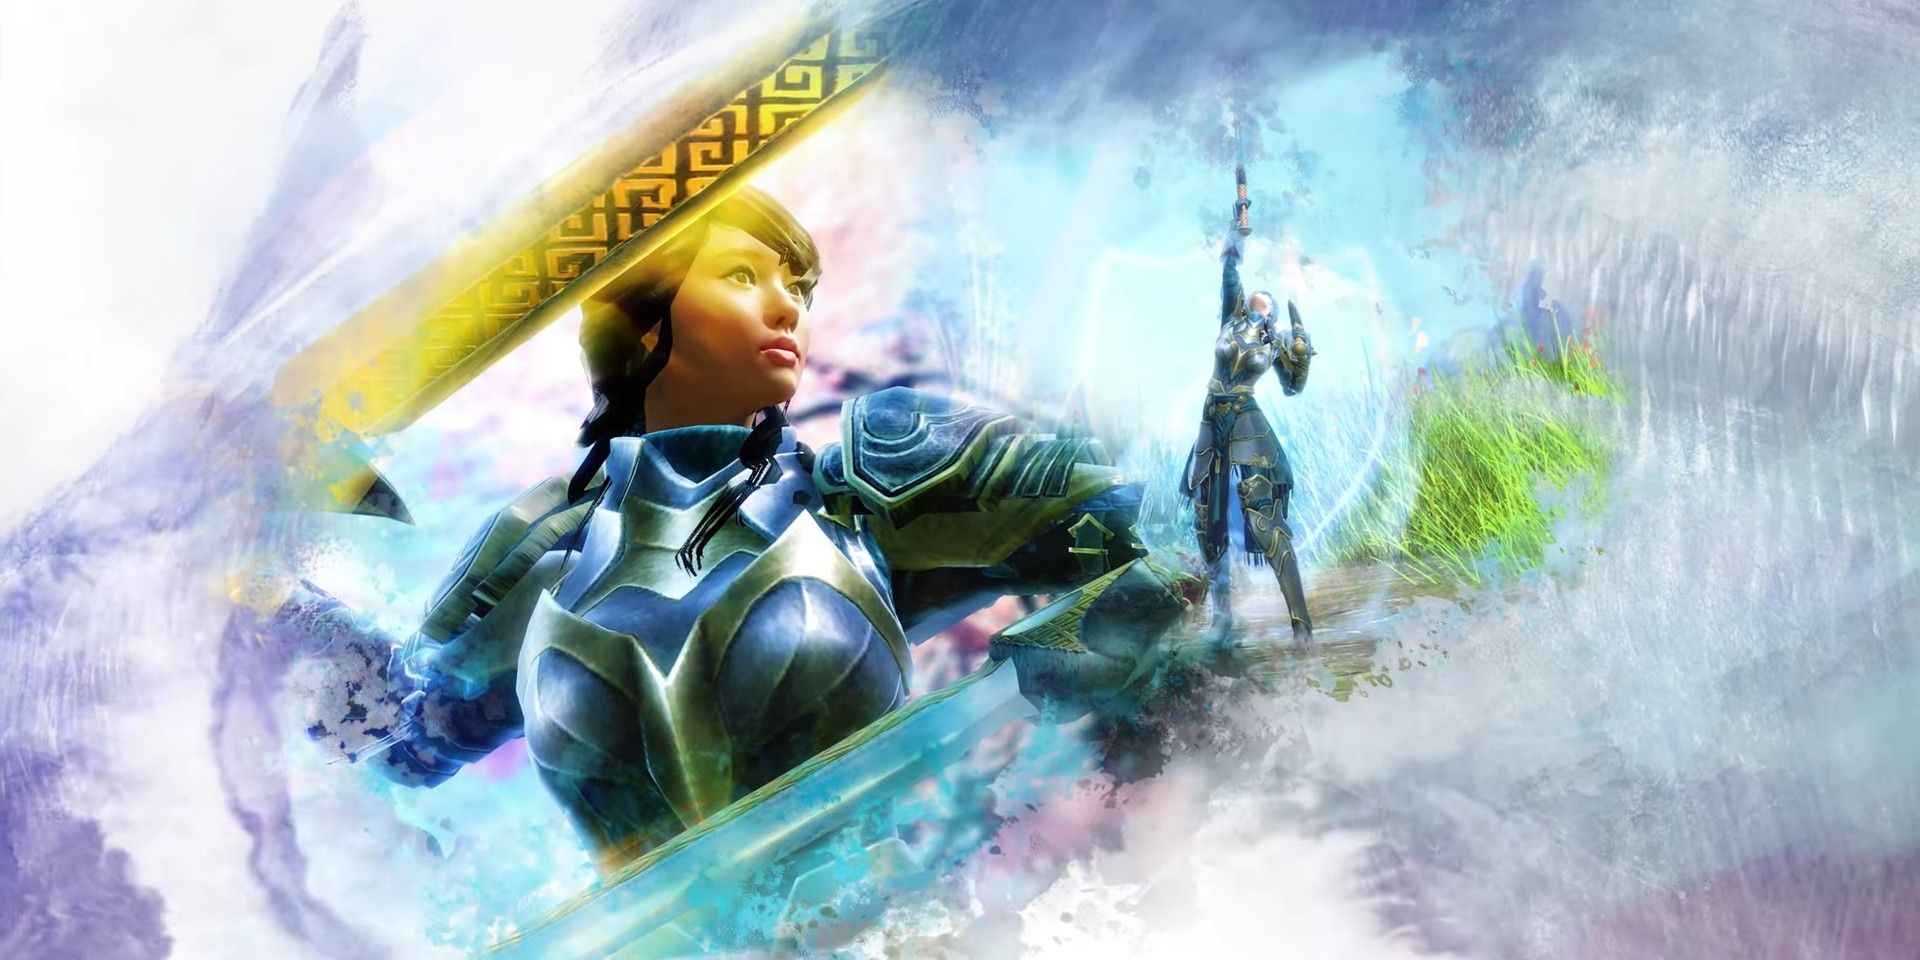 Guild Wars 2: End of Dragons Expansion - New Willbender Class Explained